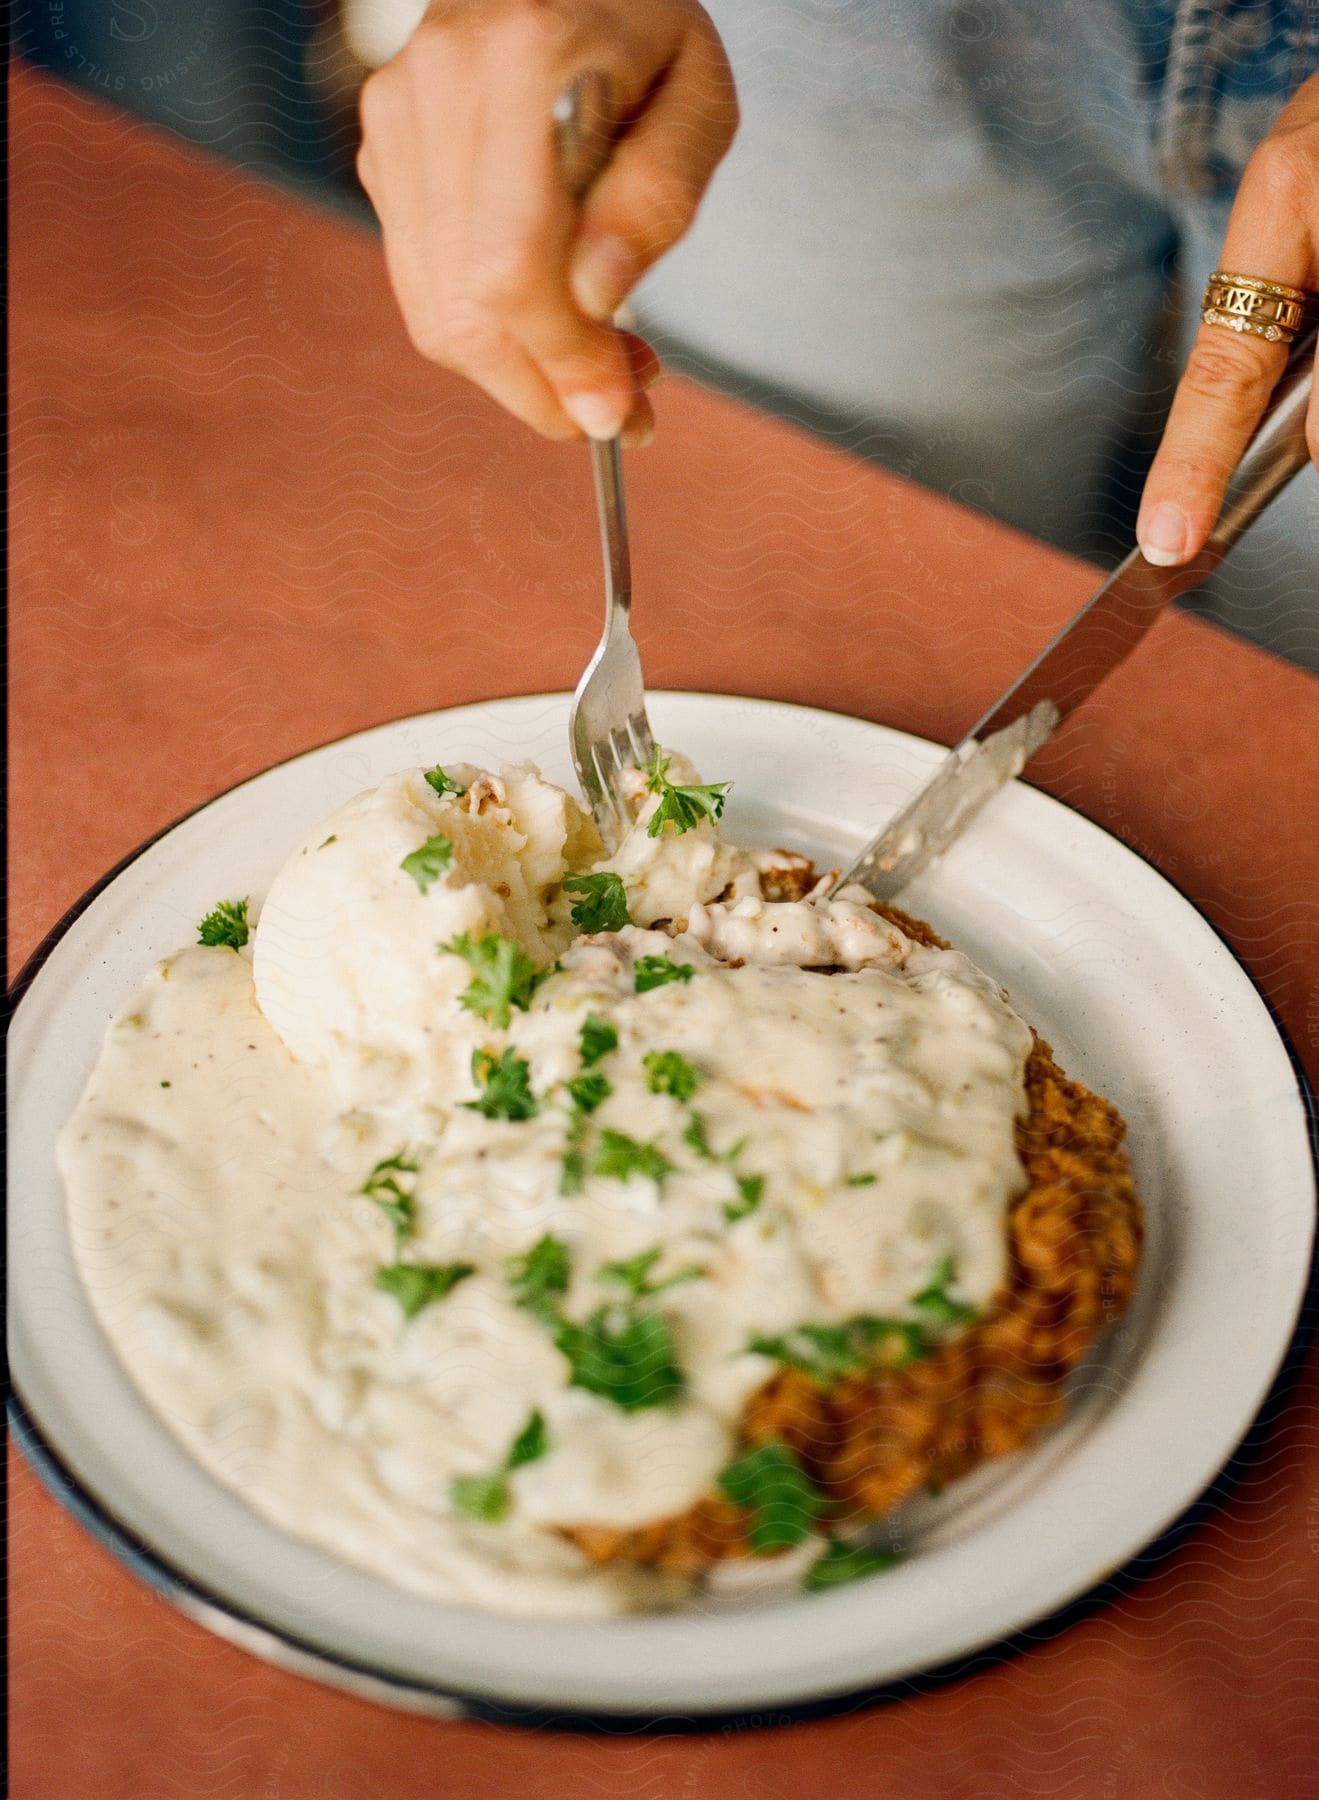 Human hands holding a fork and a knife that are on a plate of food on a table and the plate has a white sauce and full of green vegetables